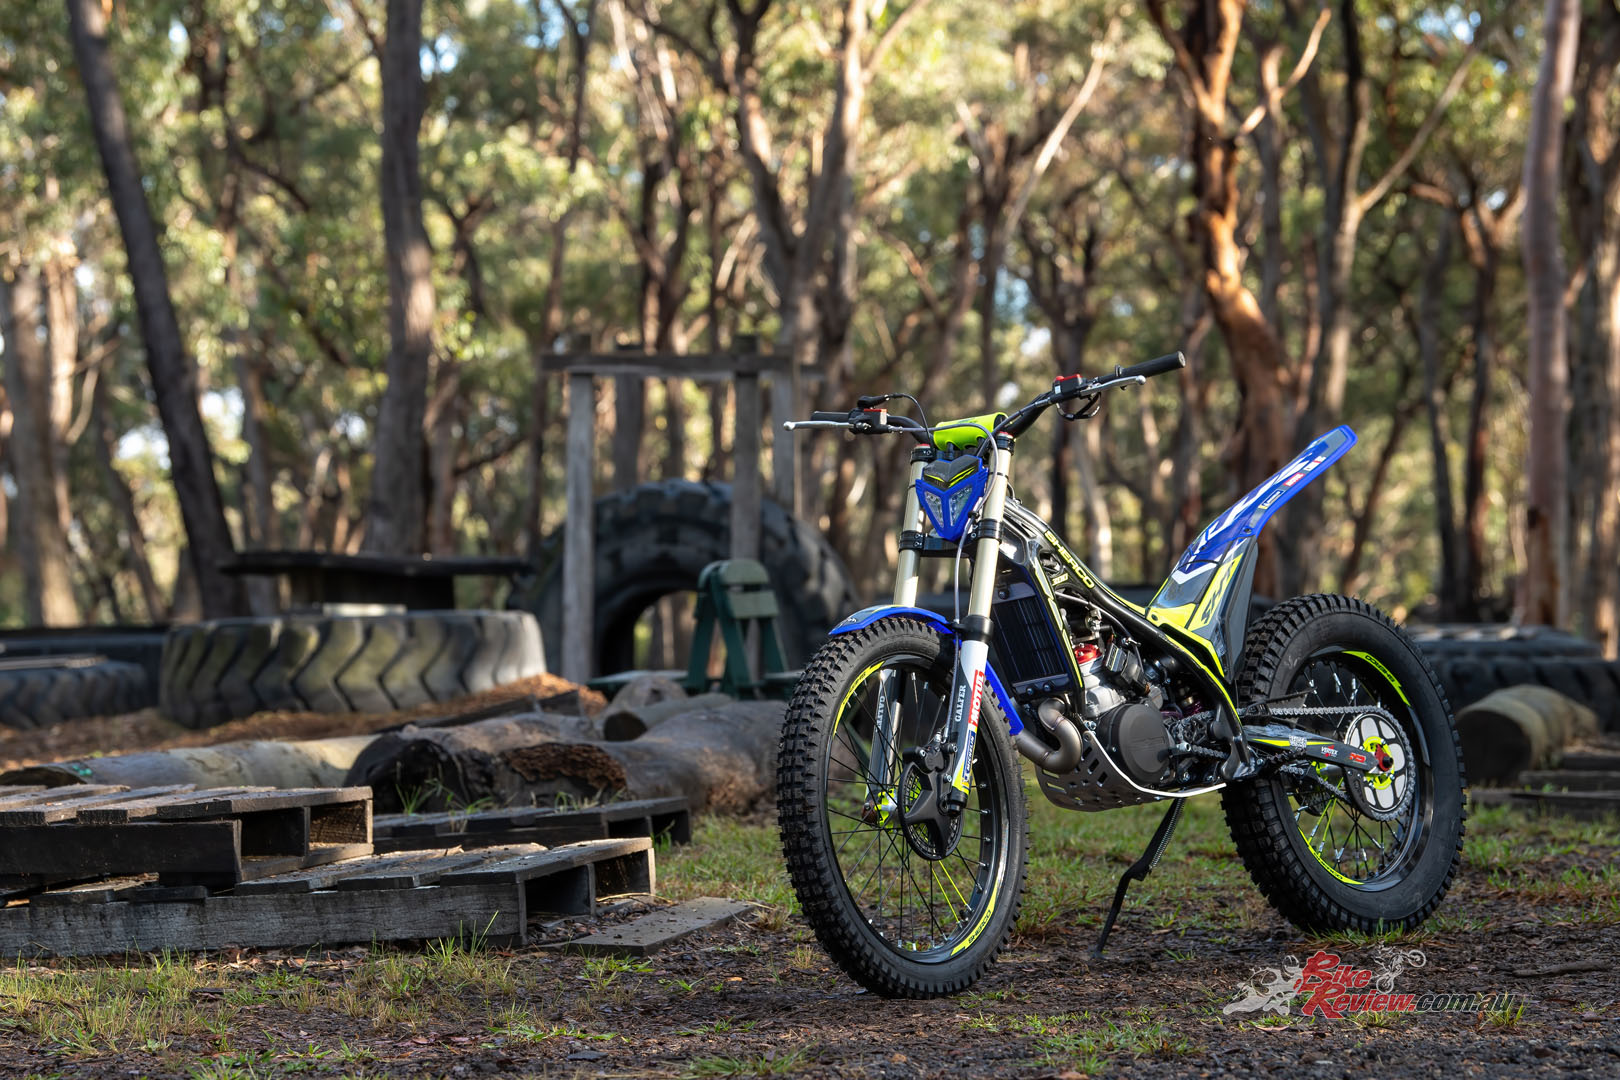 Sherco's 2022 trials range is the perfect choice for riders looking to get into the sport. Zane went out to check them out as his first outing on a trials bike!